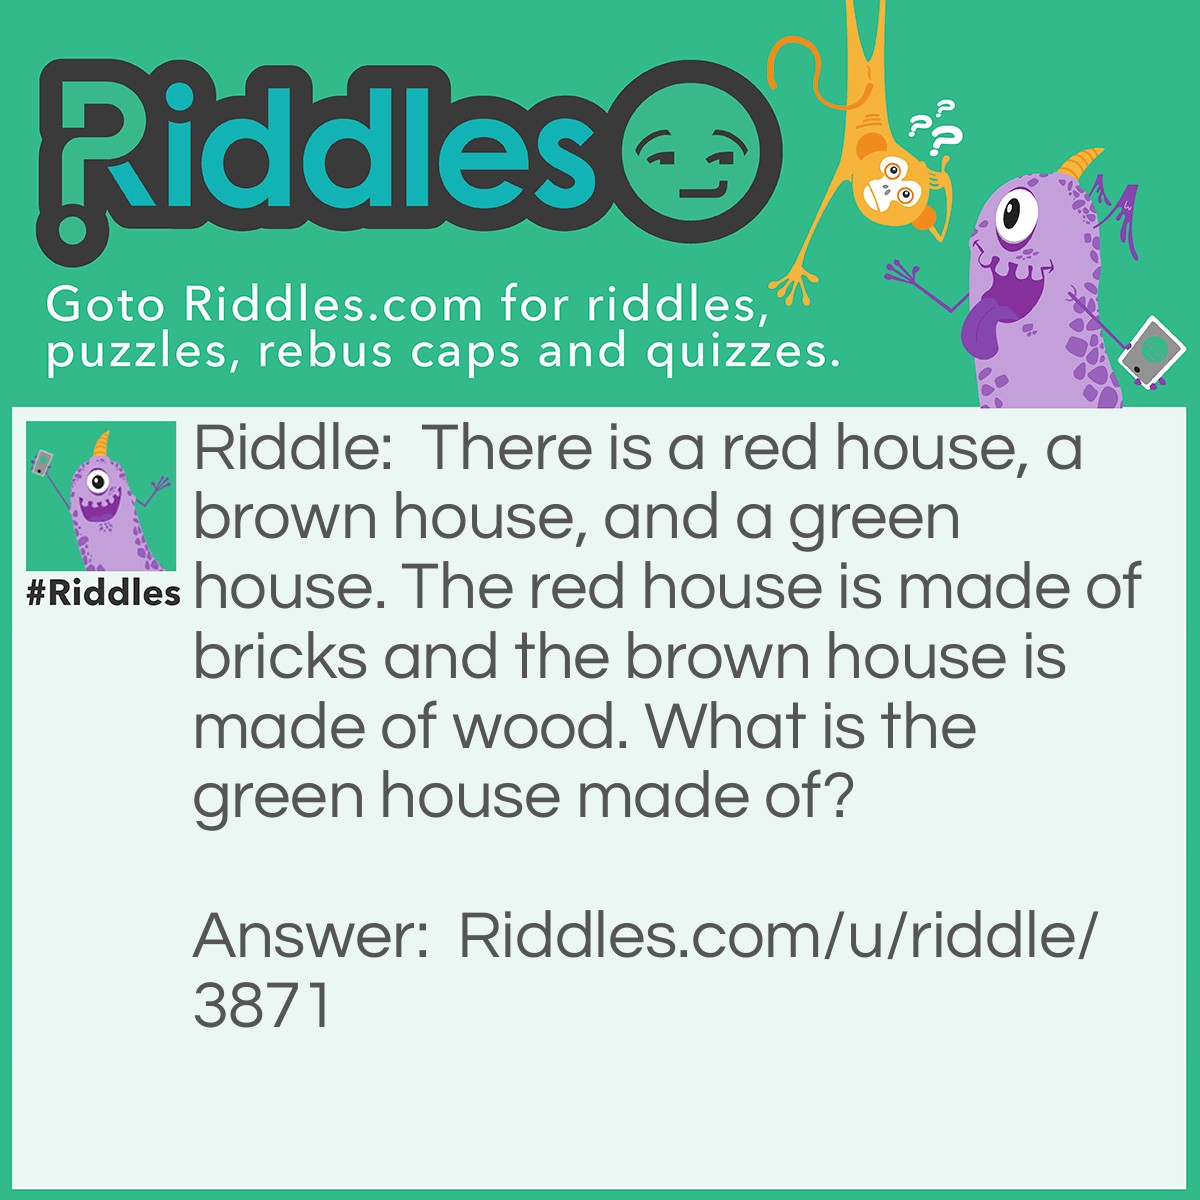 Riddle: There is a red house, a brown house, and a green house. The red house is made of bricks and the brown house is made of wood. What is the green house made of? Answer: Glass.